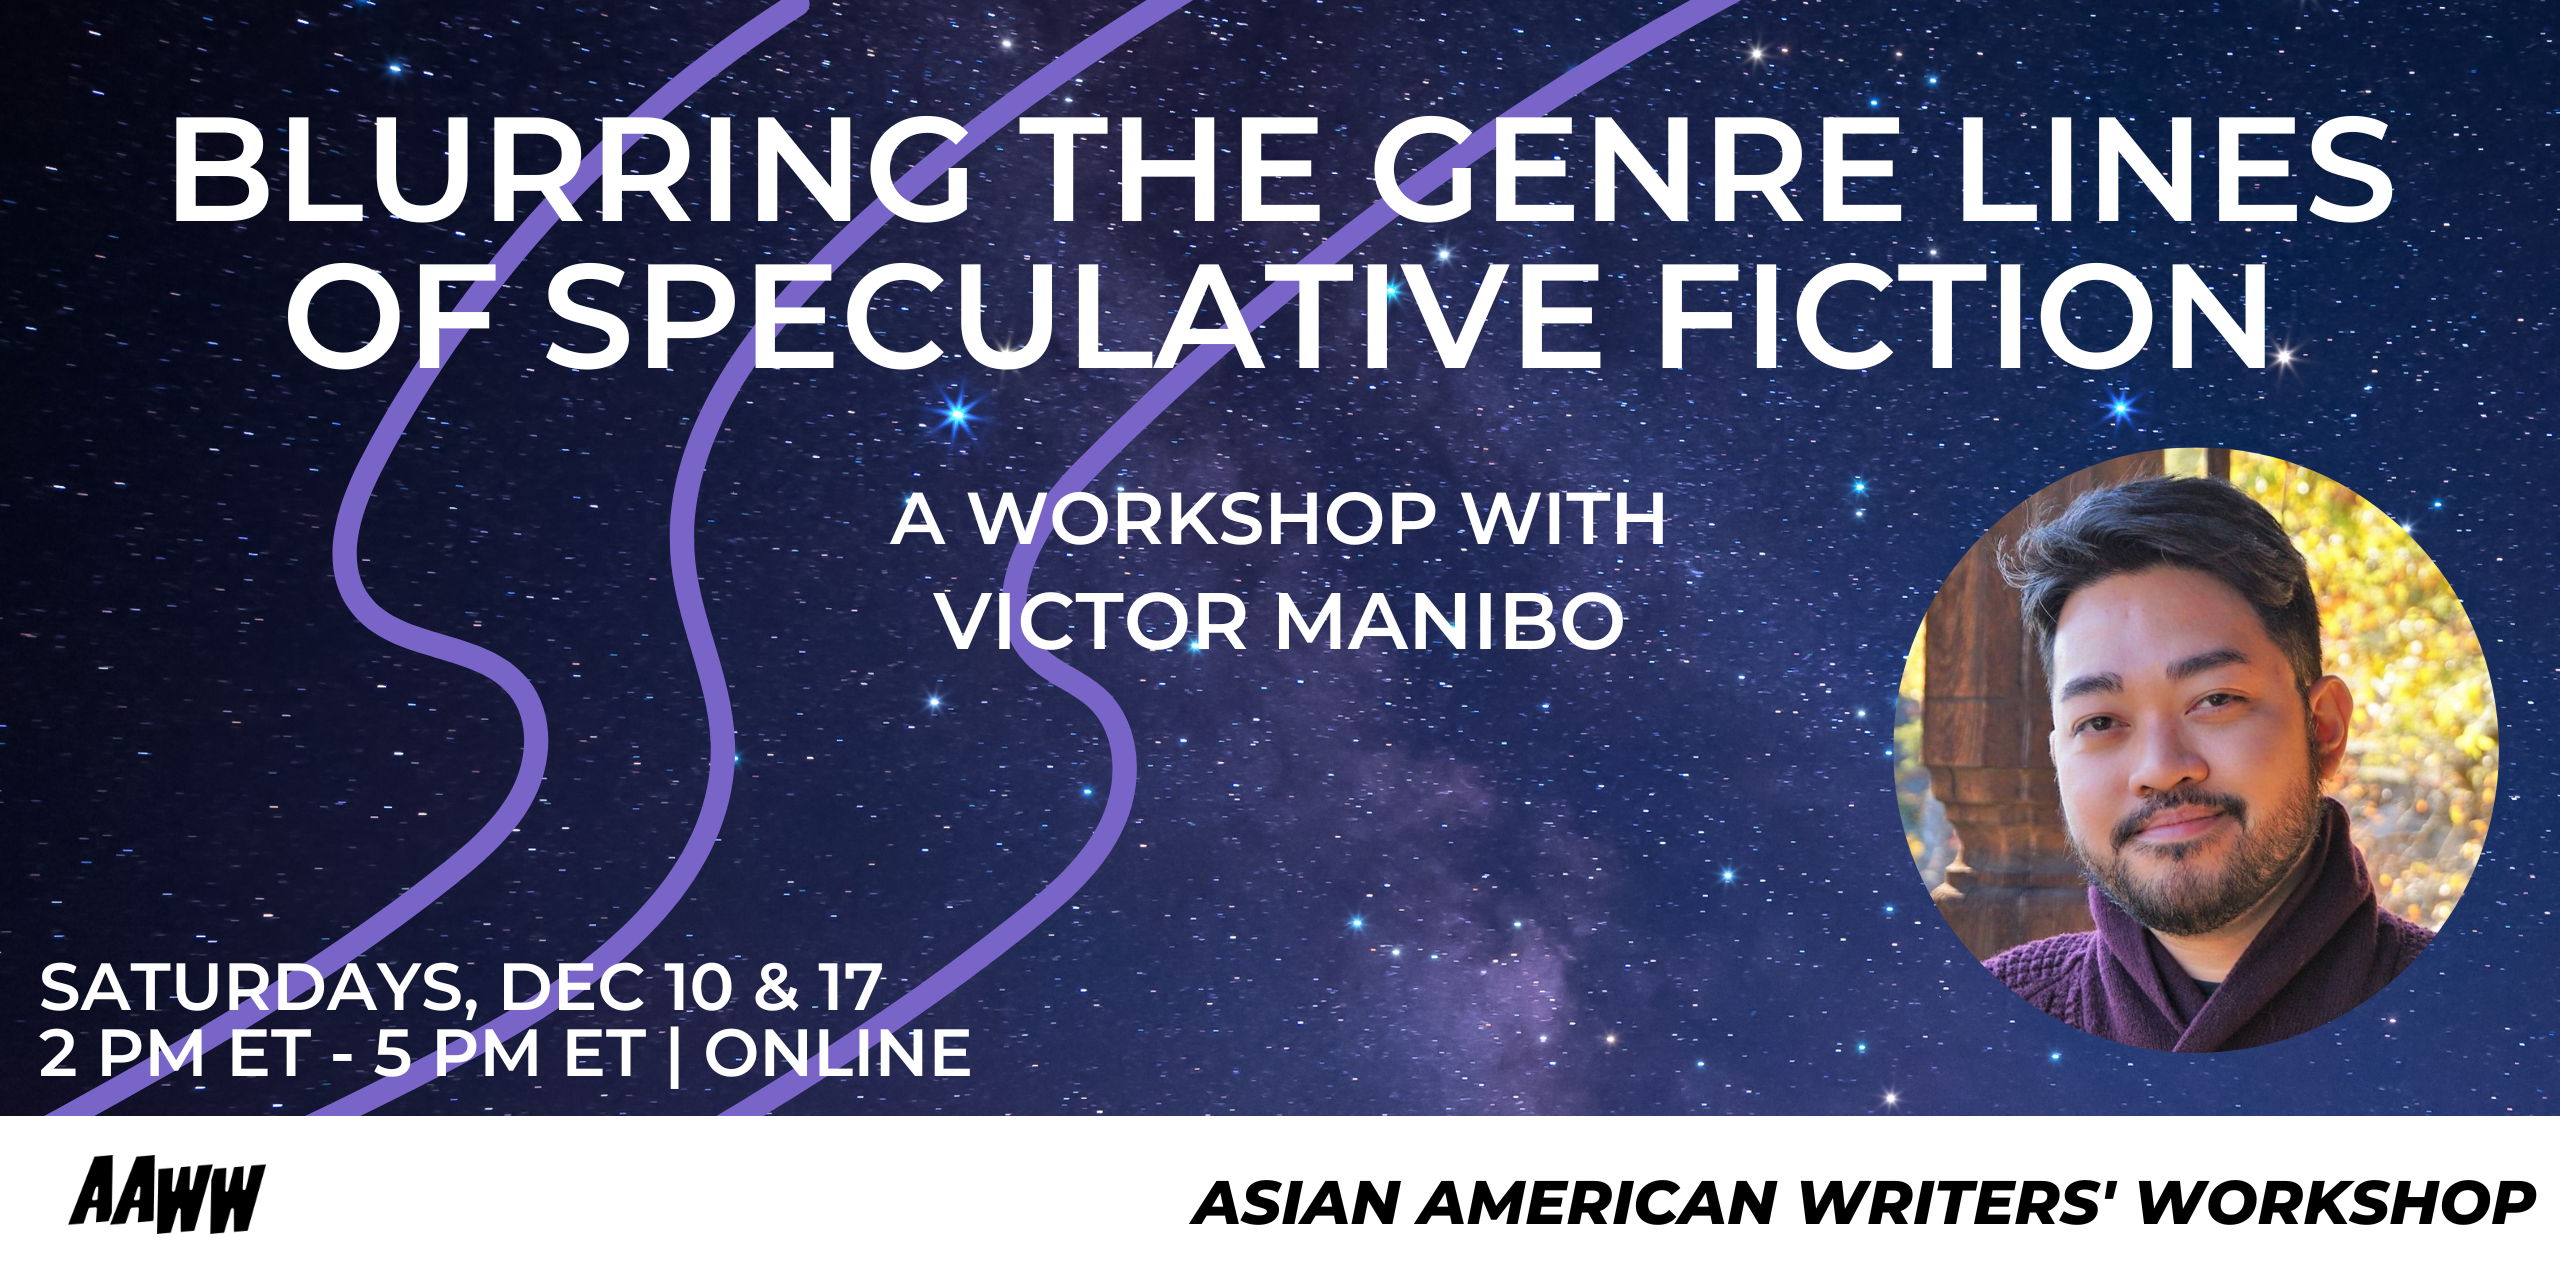 [VIRTUAL] Workshop: Blurring the Genre Lines of Speculative Fiction